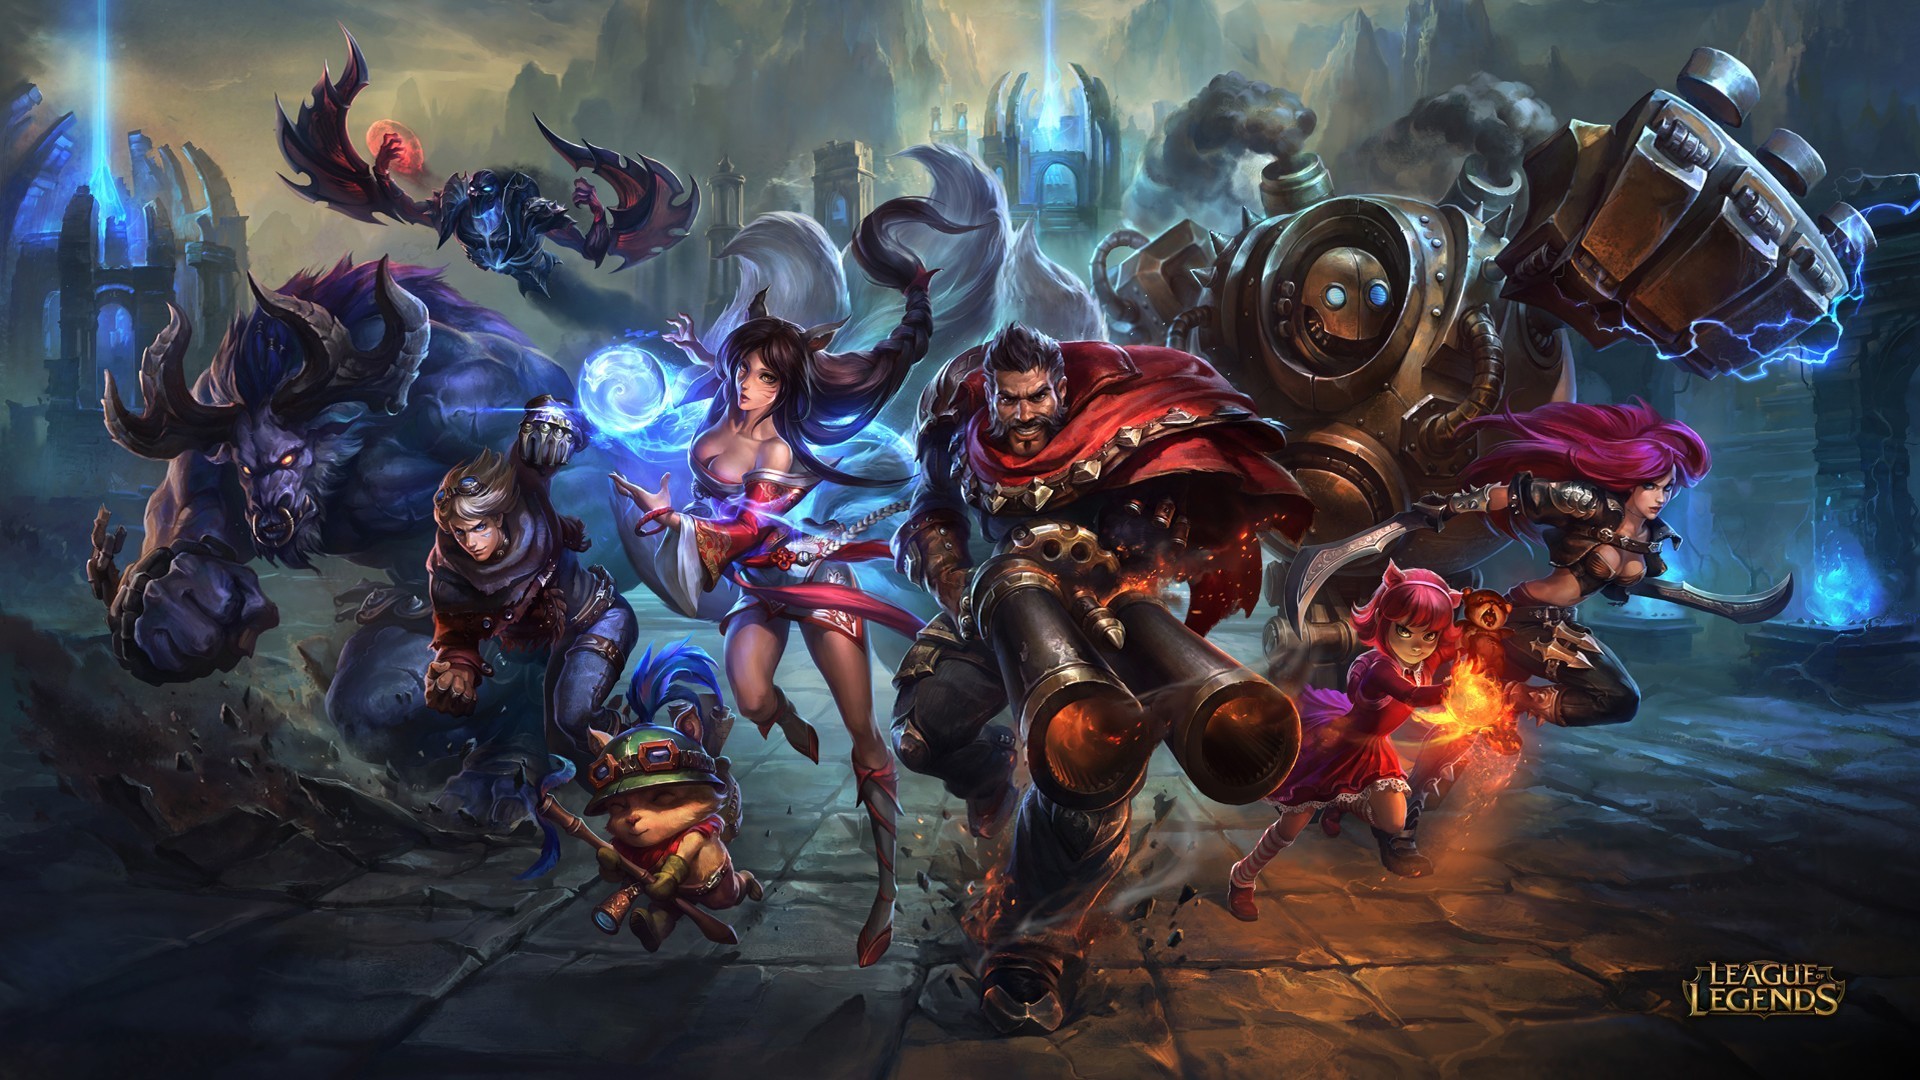 Download Now League of Legends Patch 5.6 to Get New Buffs to Old ...